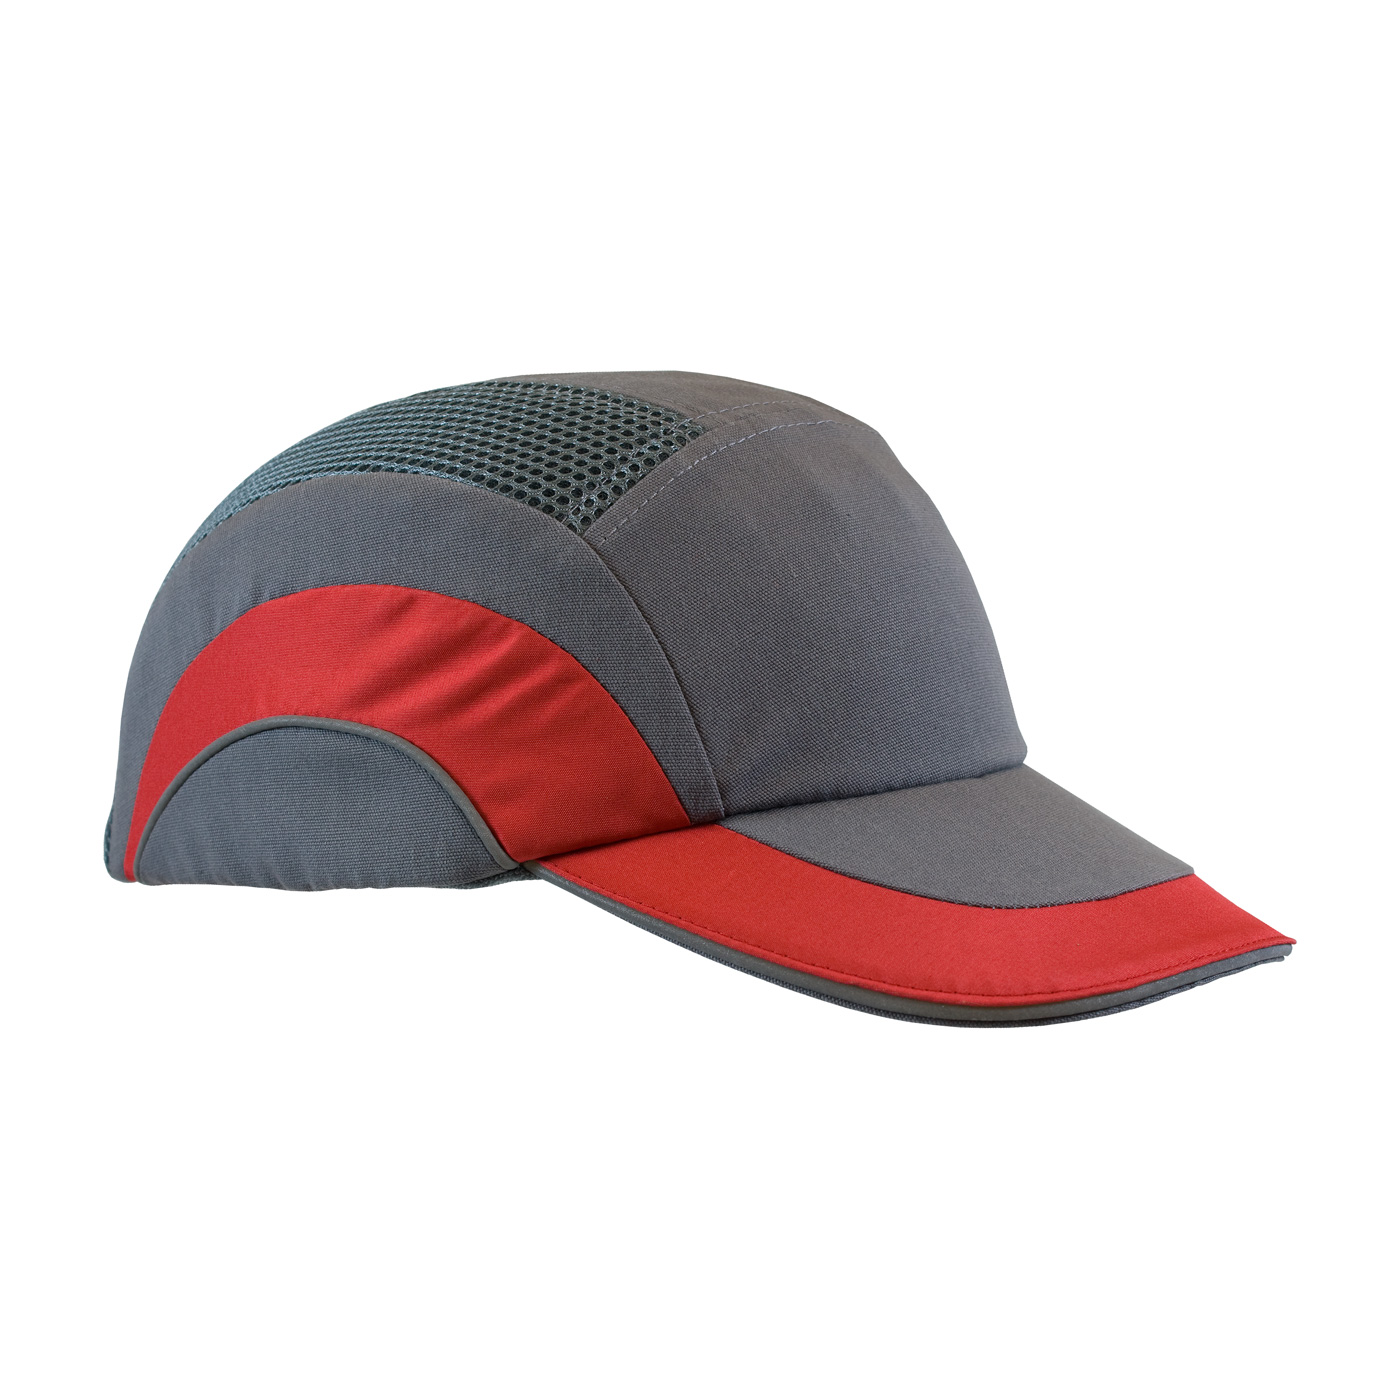 282-ABR170 PIP® Low-Profile HardCap A1+™ Baseball Style Bump Cap with Reflective Piping.  Gray/Red